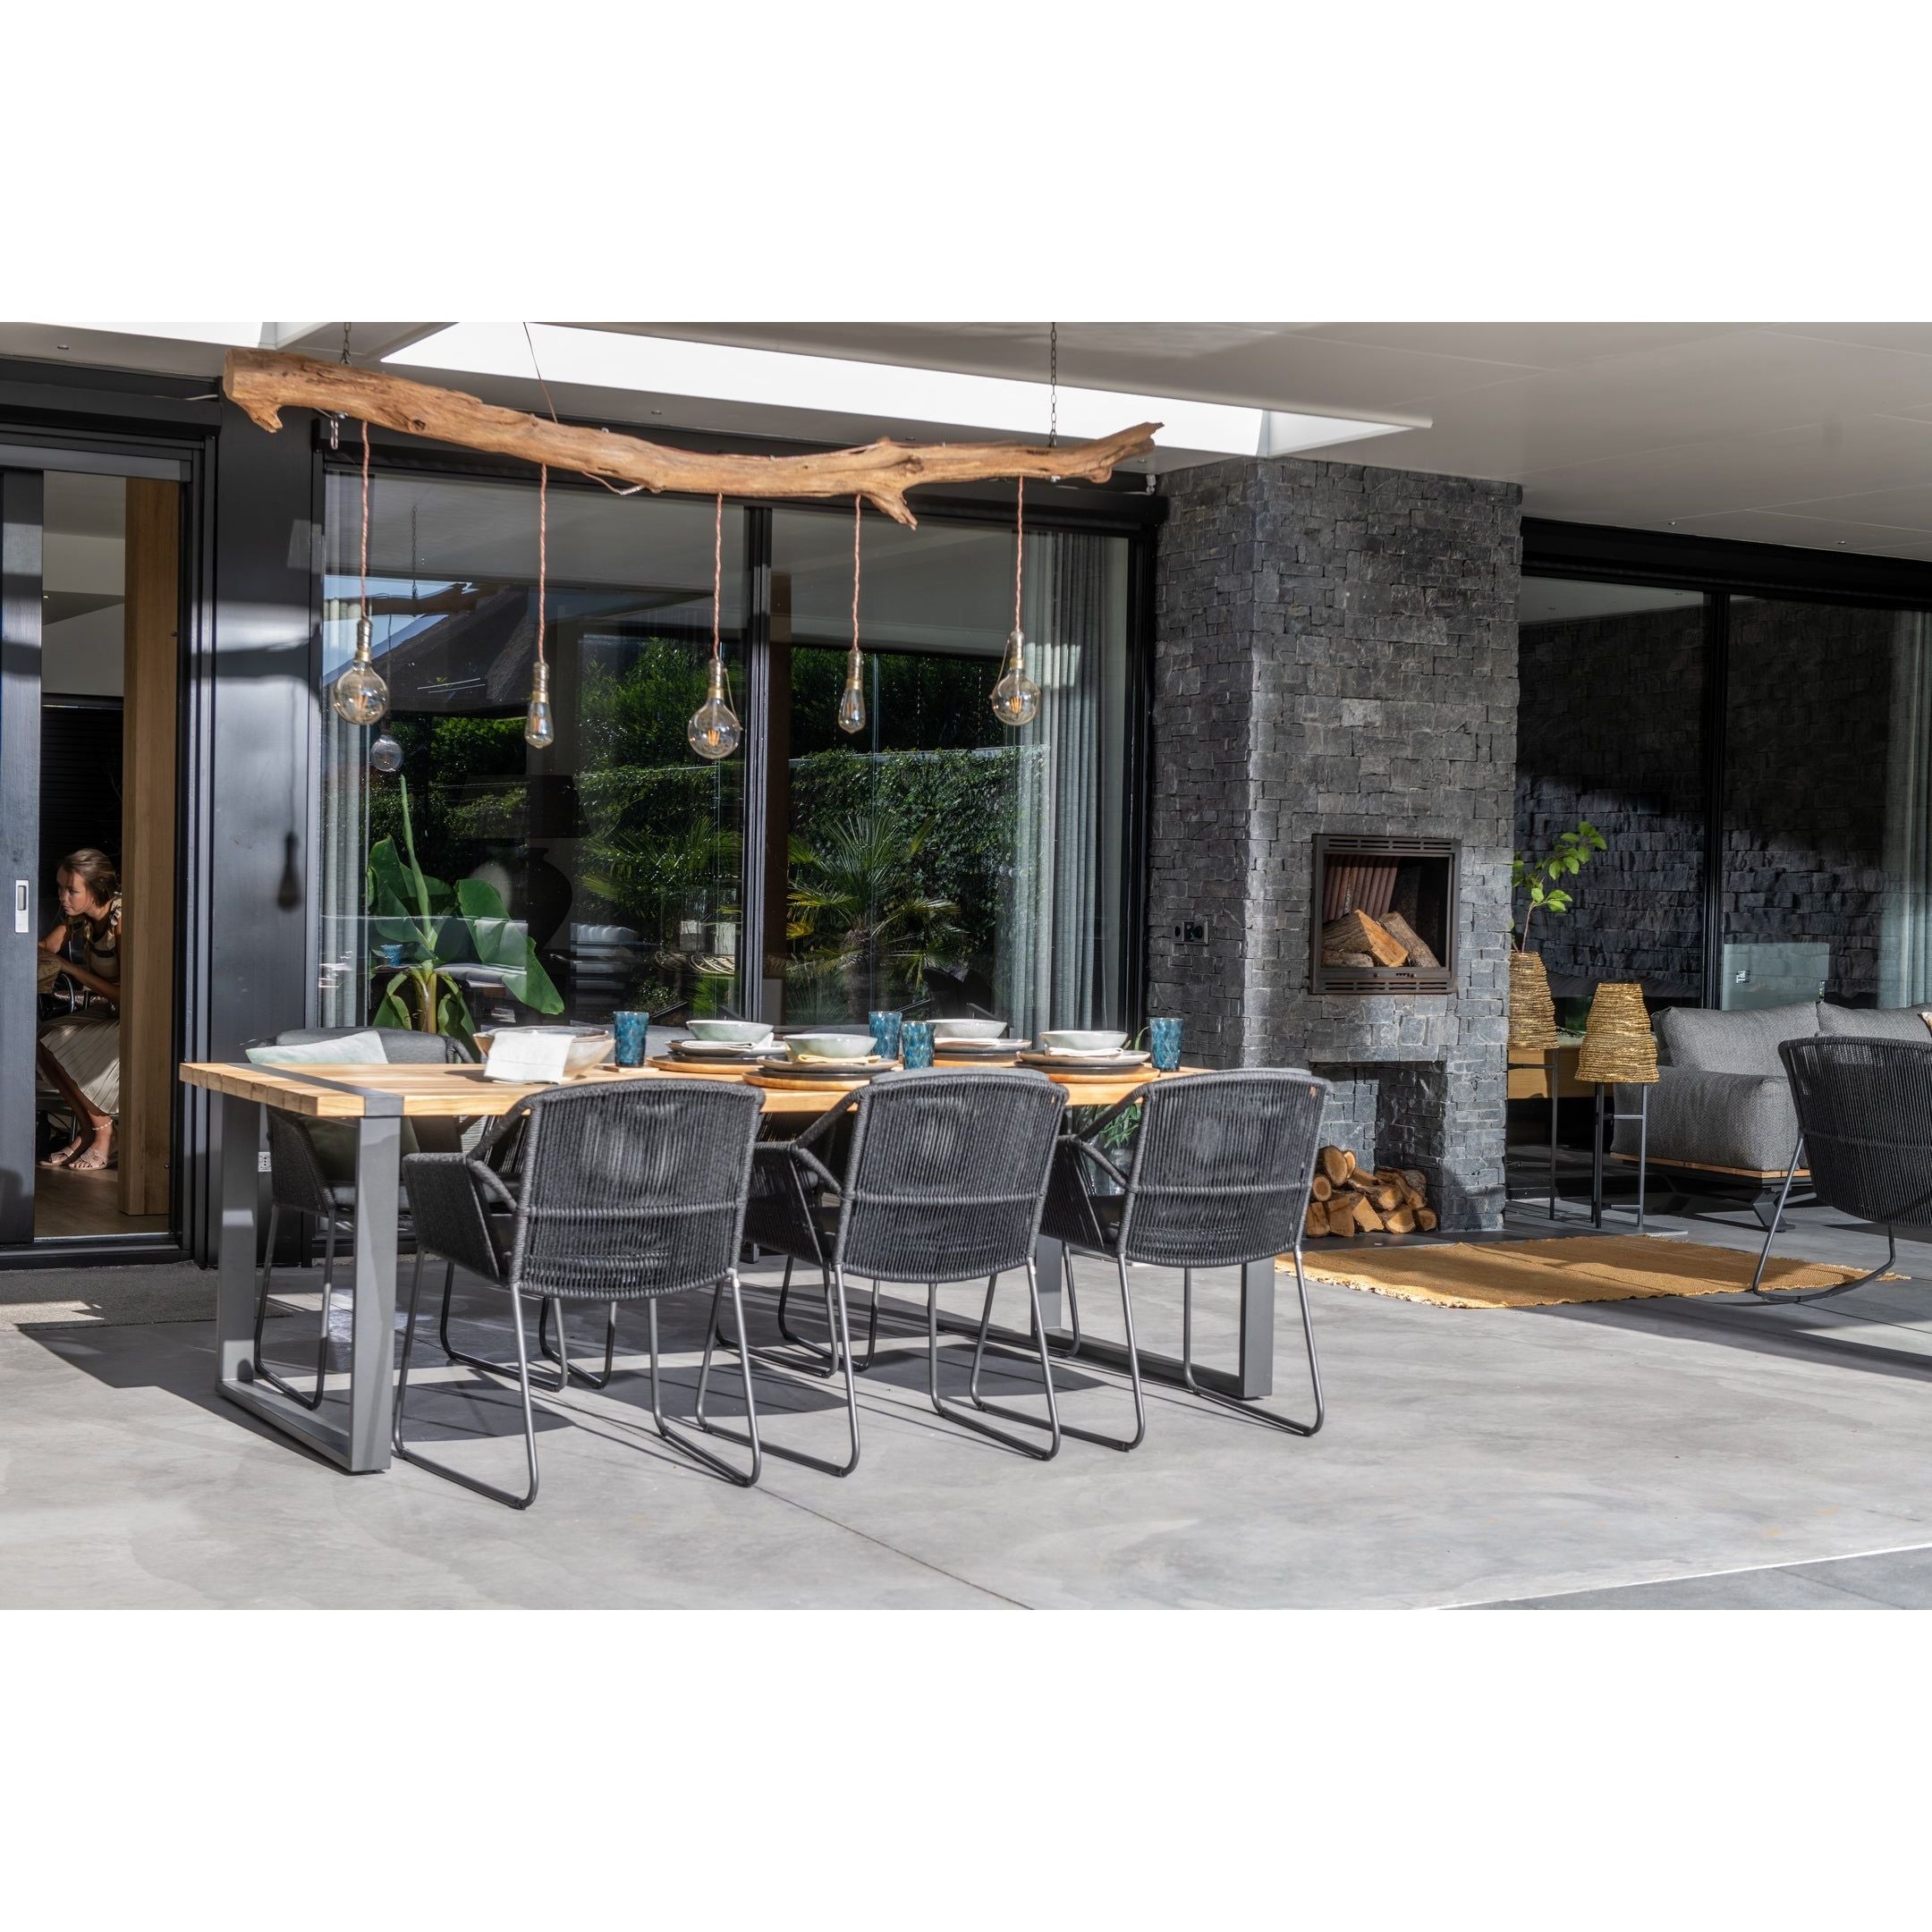 4 Seasons Outdoor Accor 6 Seater Dining Set with 240cm Alto Table